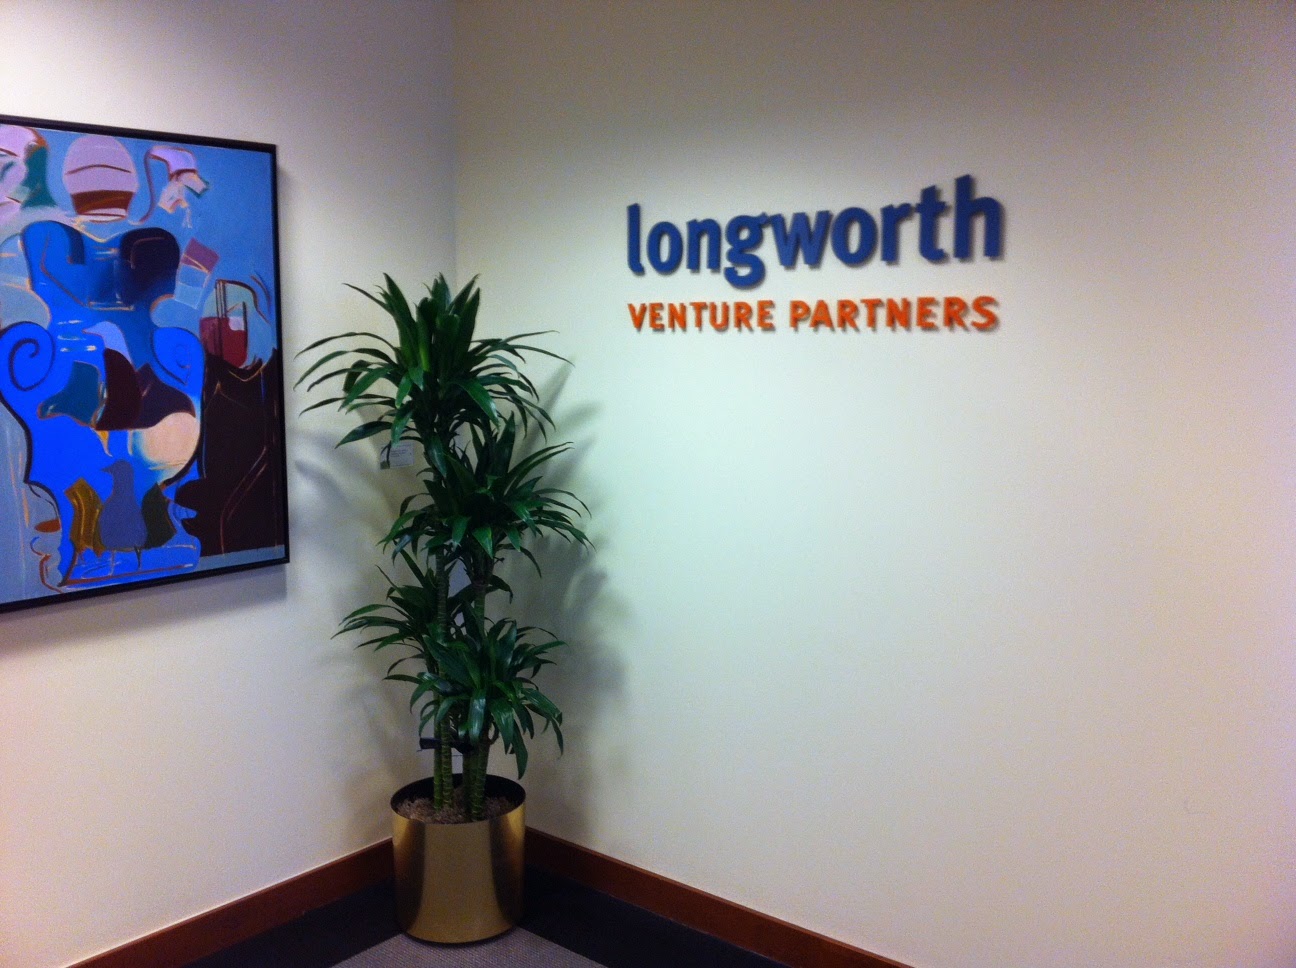 longworth Ventures waltham, MA flower rotation and free proposals, office designs